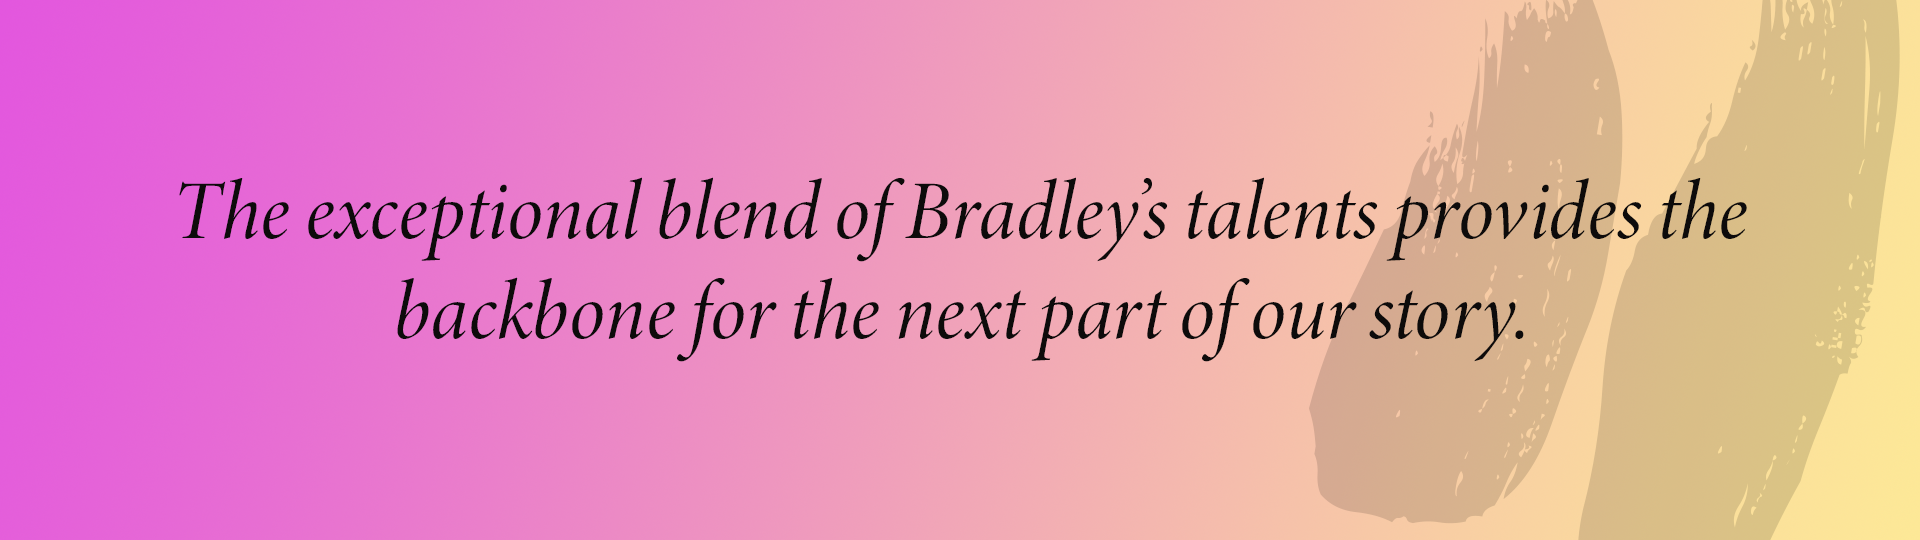 The exceptional blend of Bradley’s talents provides the backbone for the next part of our story.